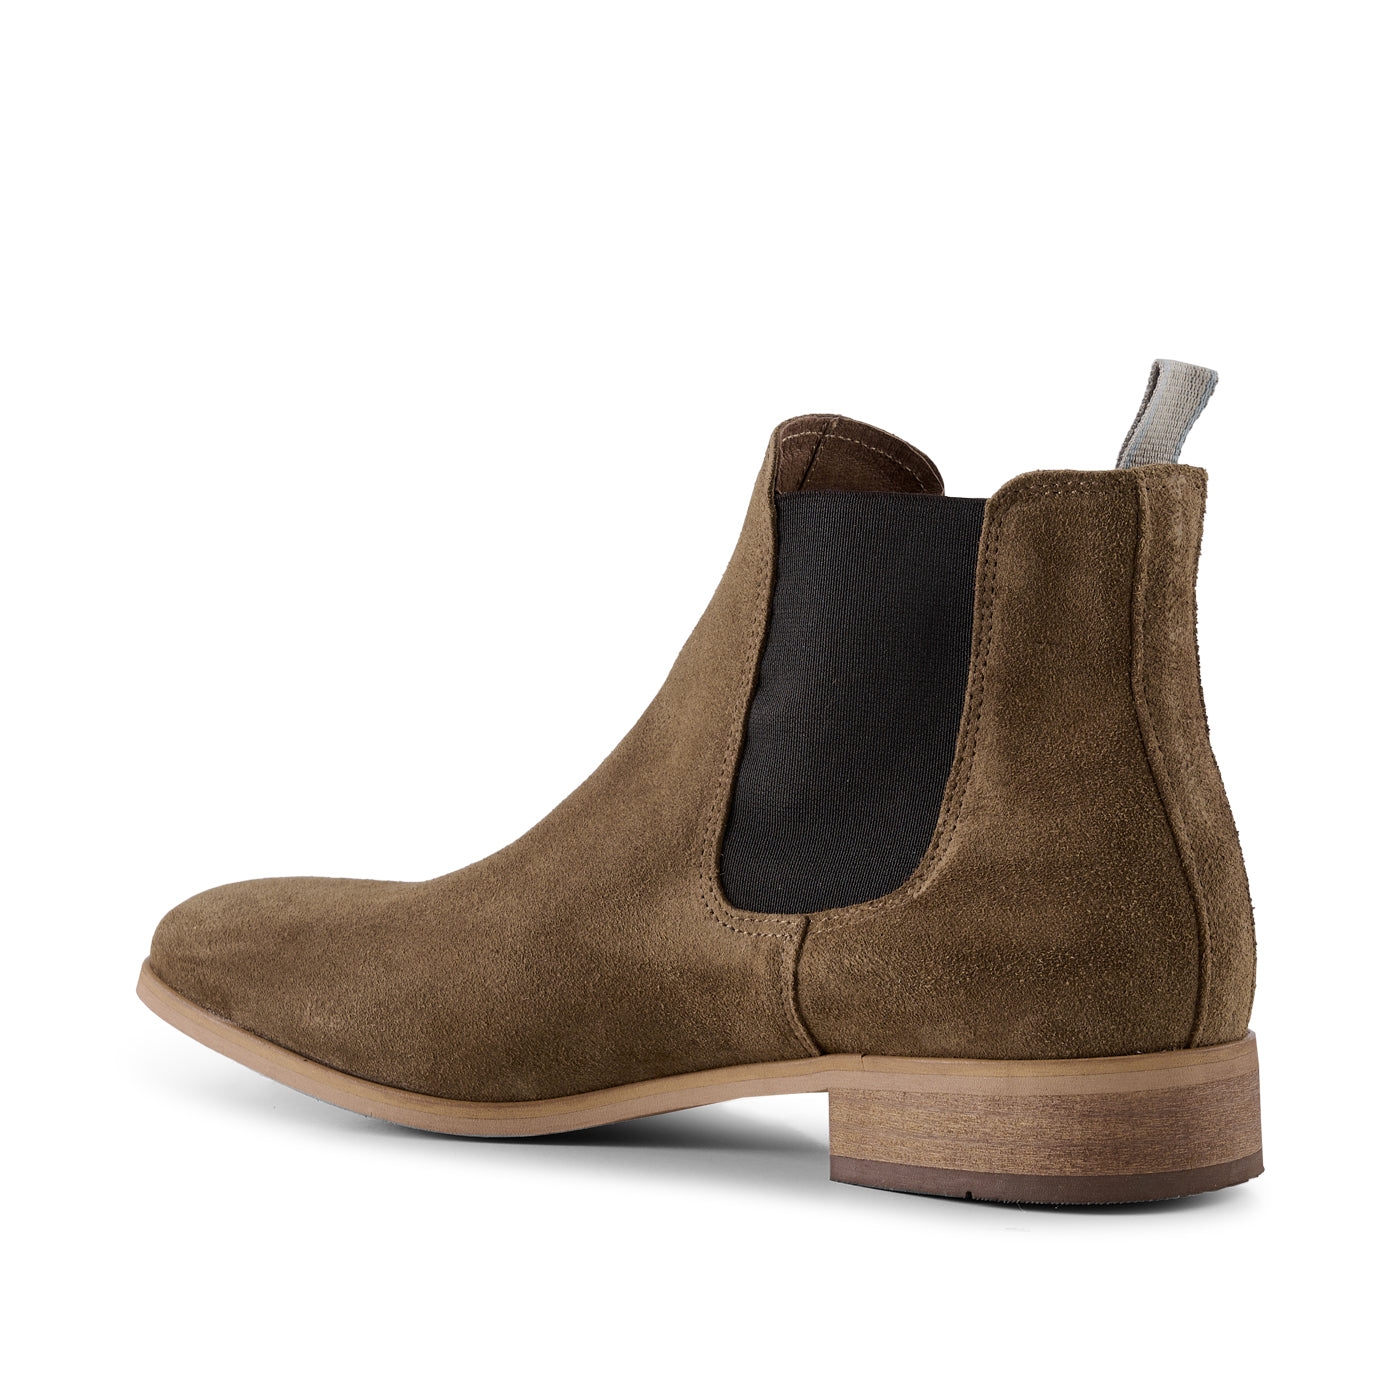 Dev chelsea boot suede - TOBACCO – SHOE THE BEAR - US